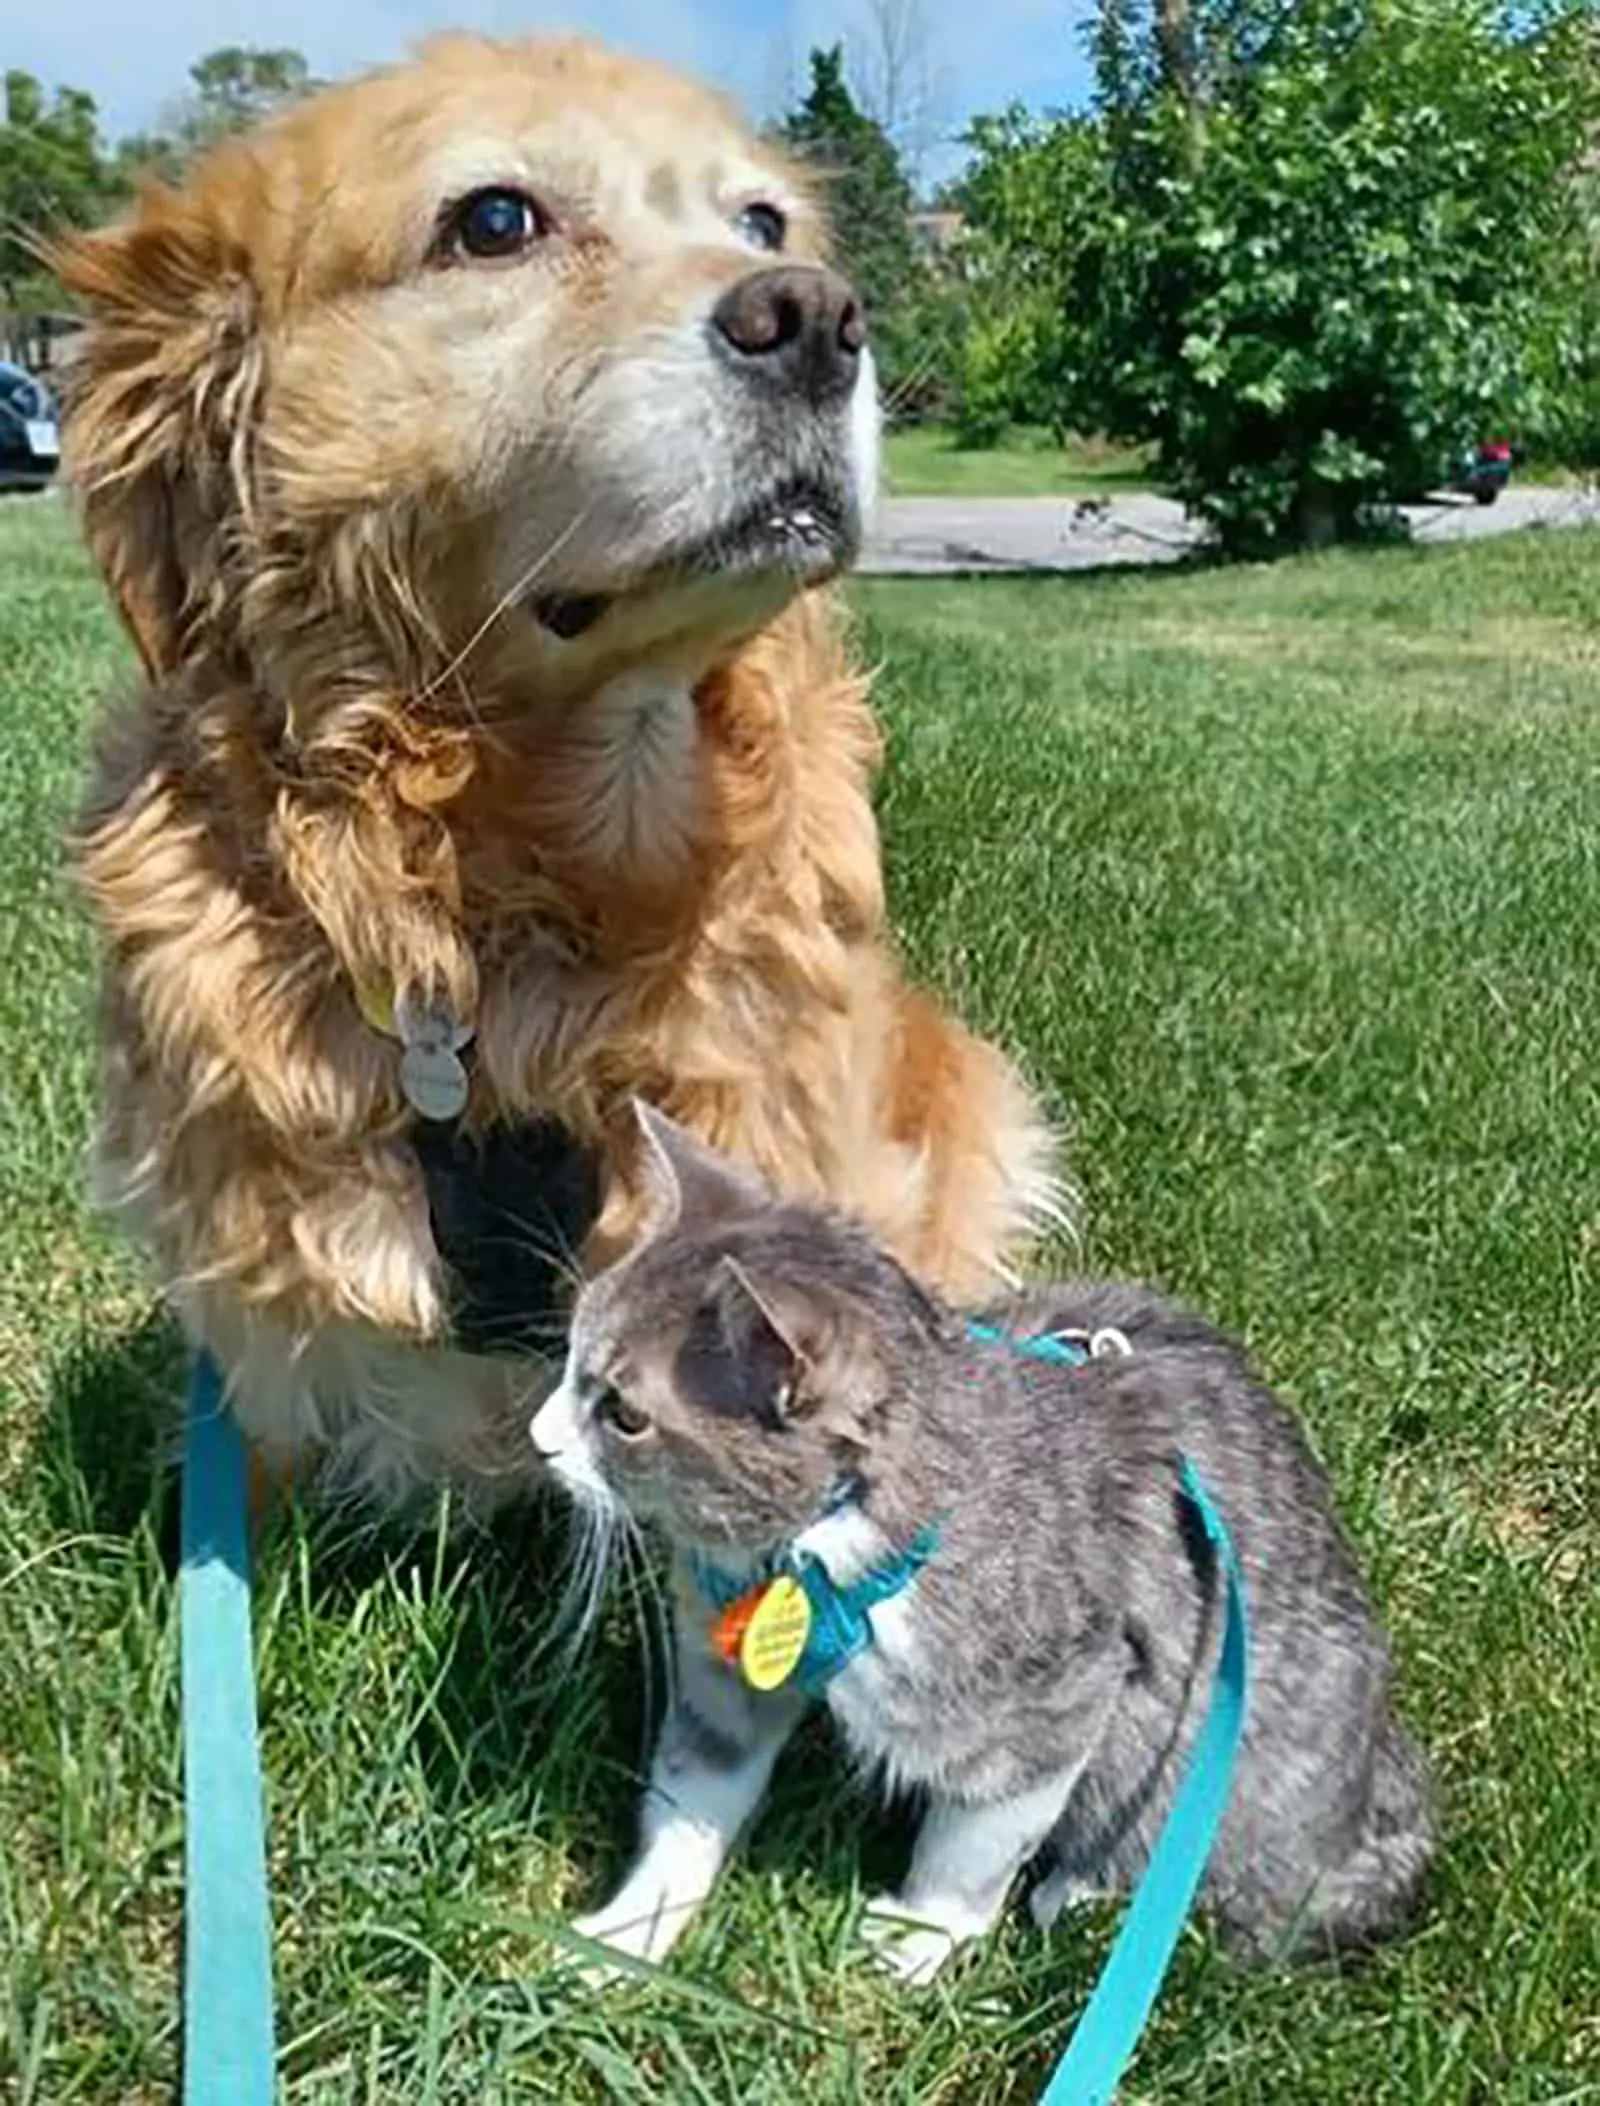 mini golden retriever dog and a cat sitting together on the lawn